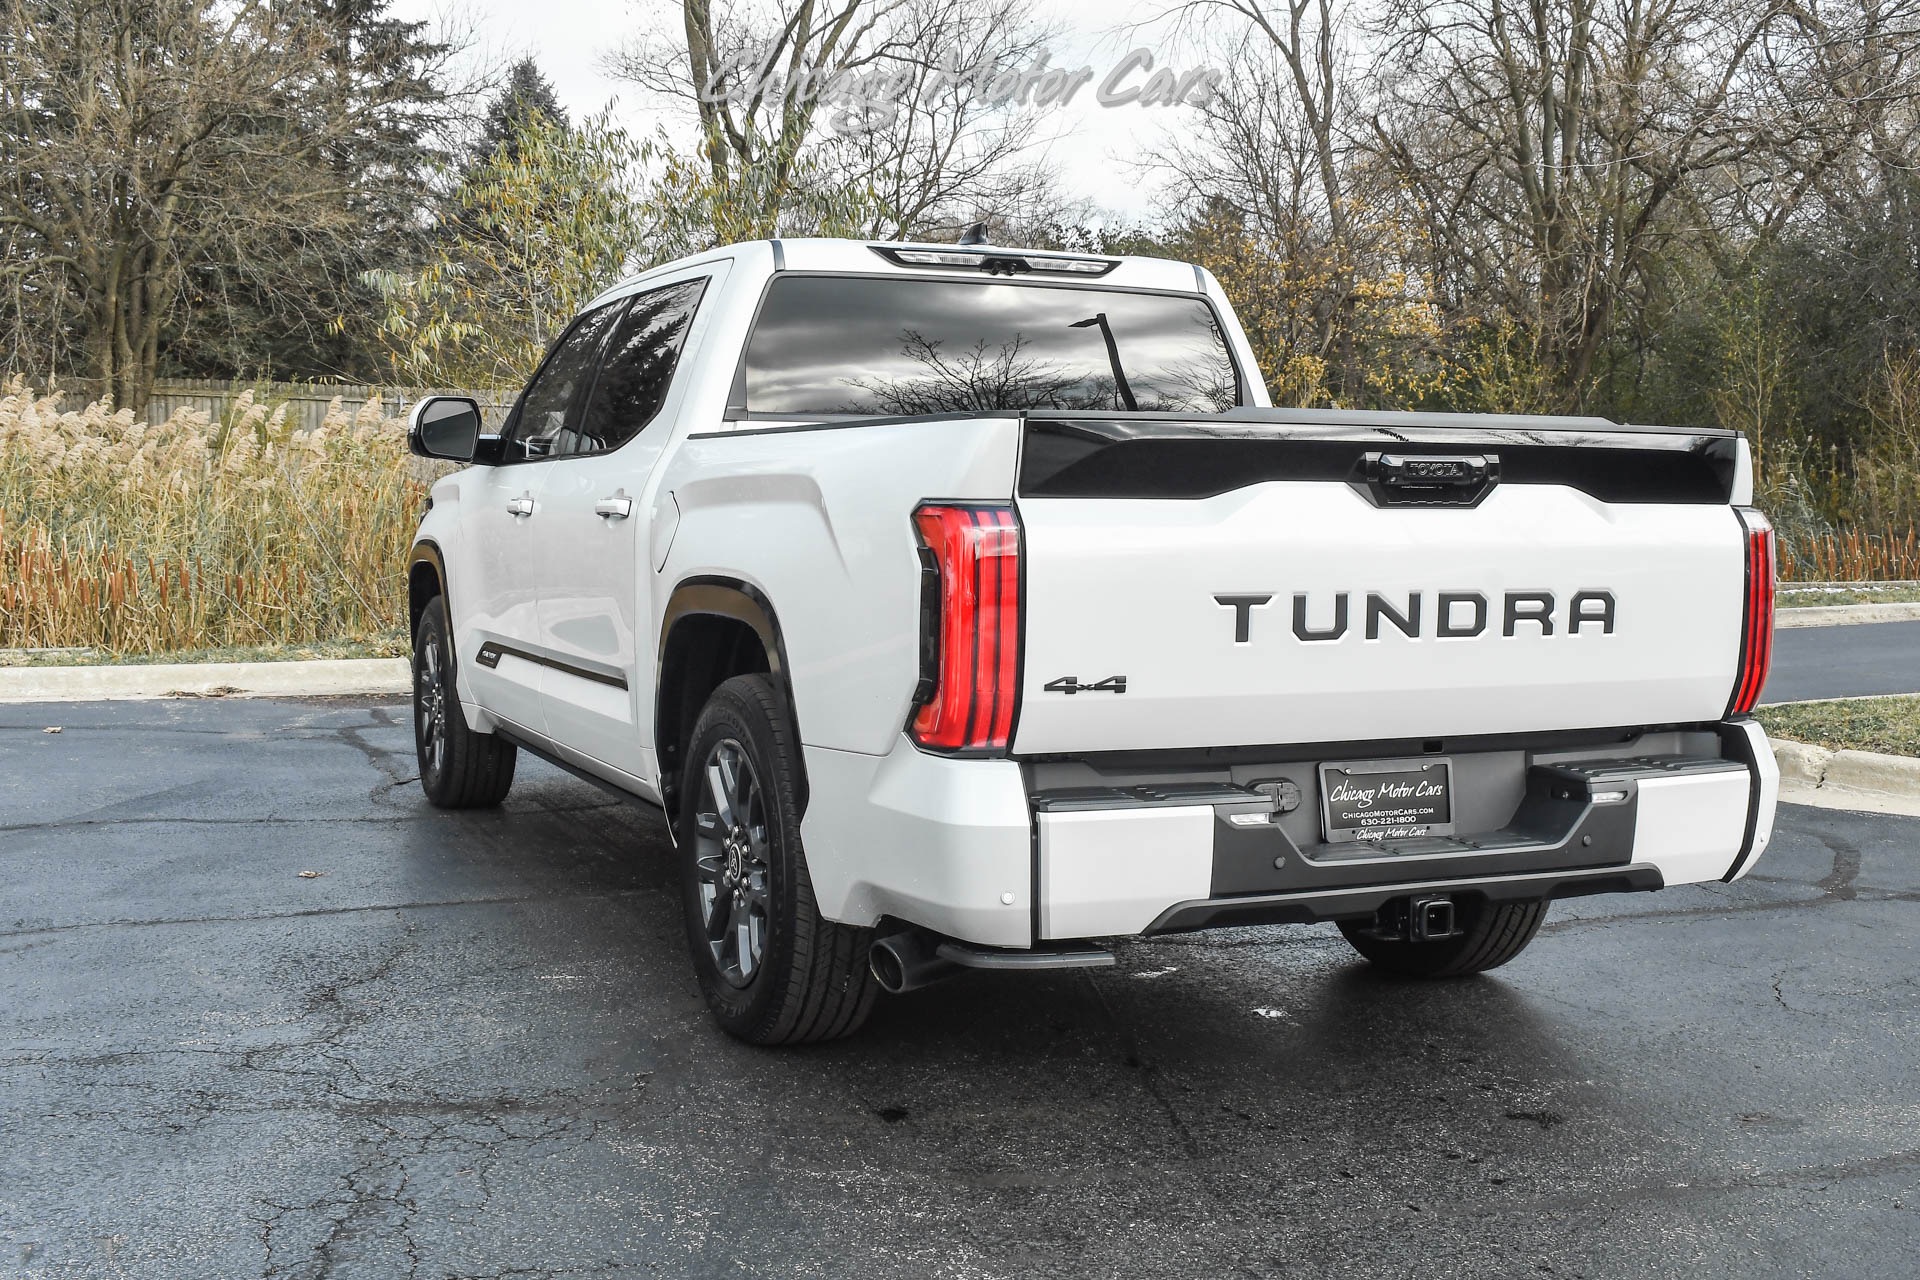 Used-2023-Toyota-Tundra-Platinum-HV-4X4-Pickup-I-FORCE-MAX-ADVANCE-Pkg-Special-Paint-LOADED